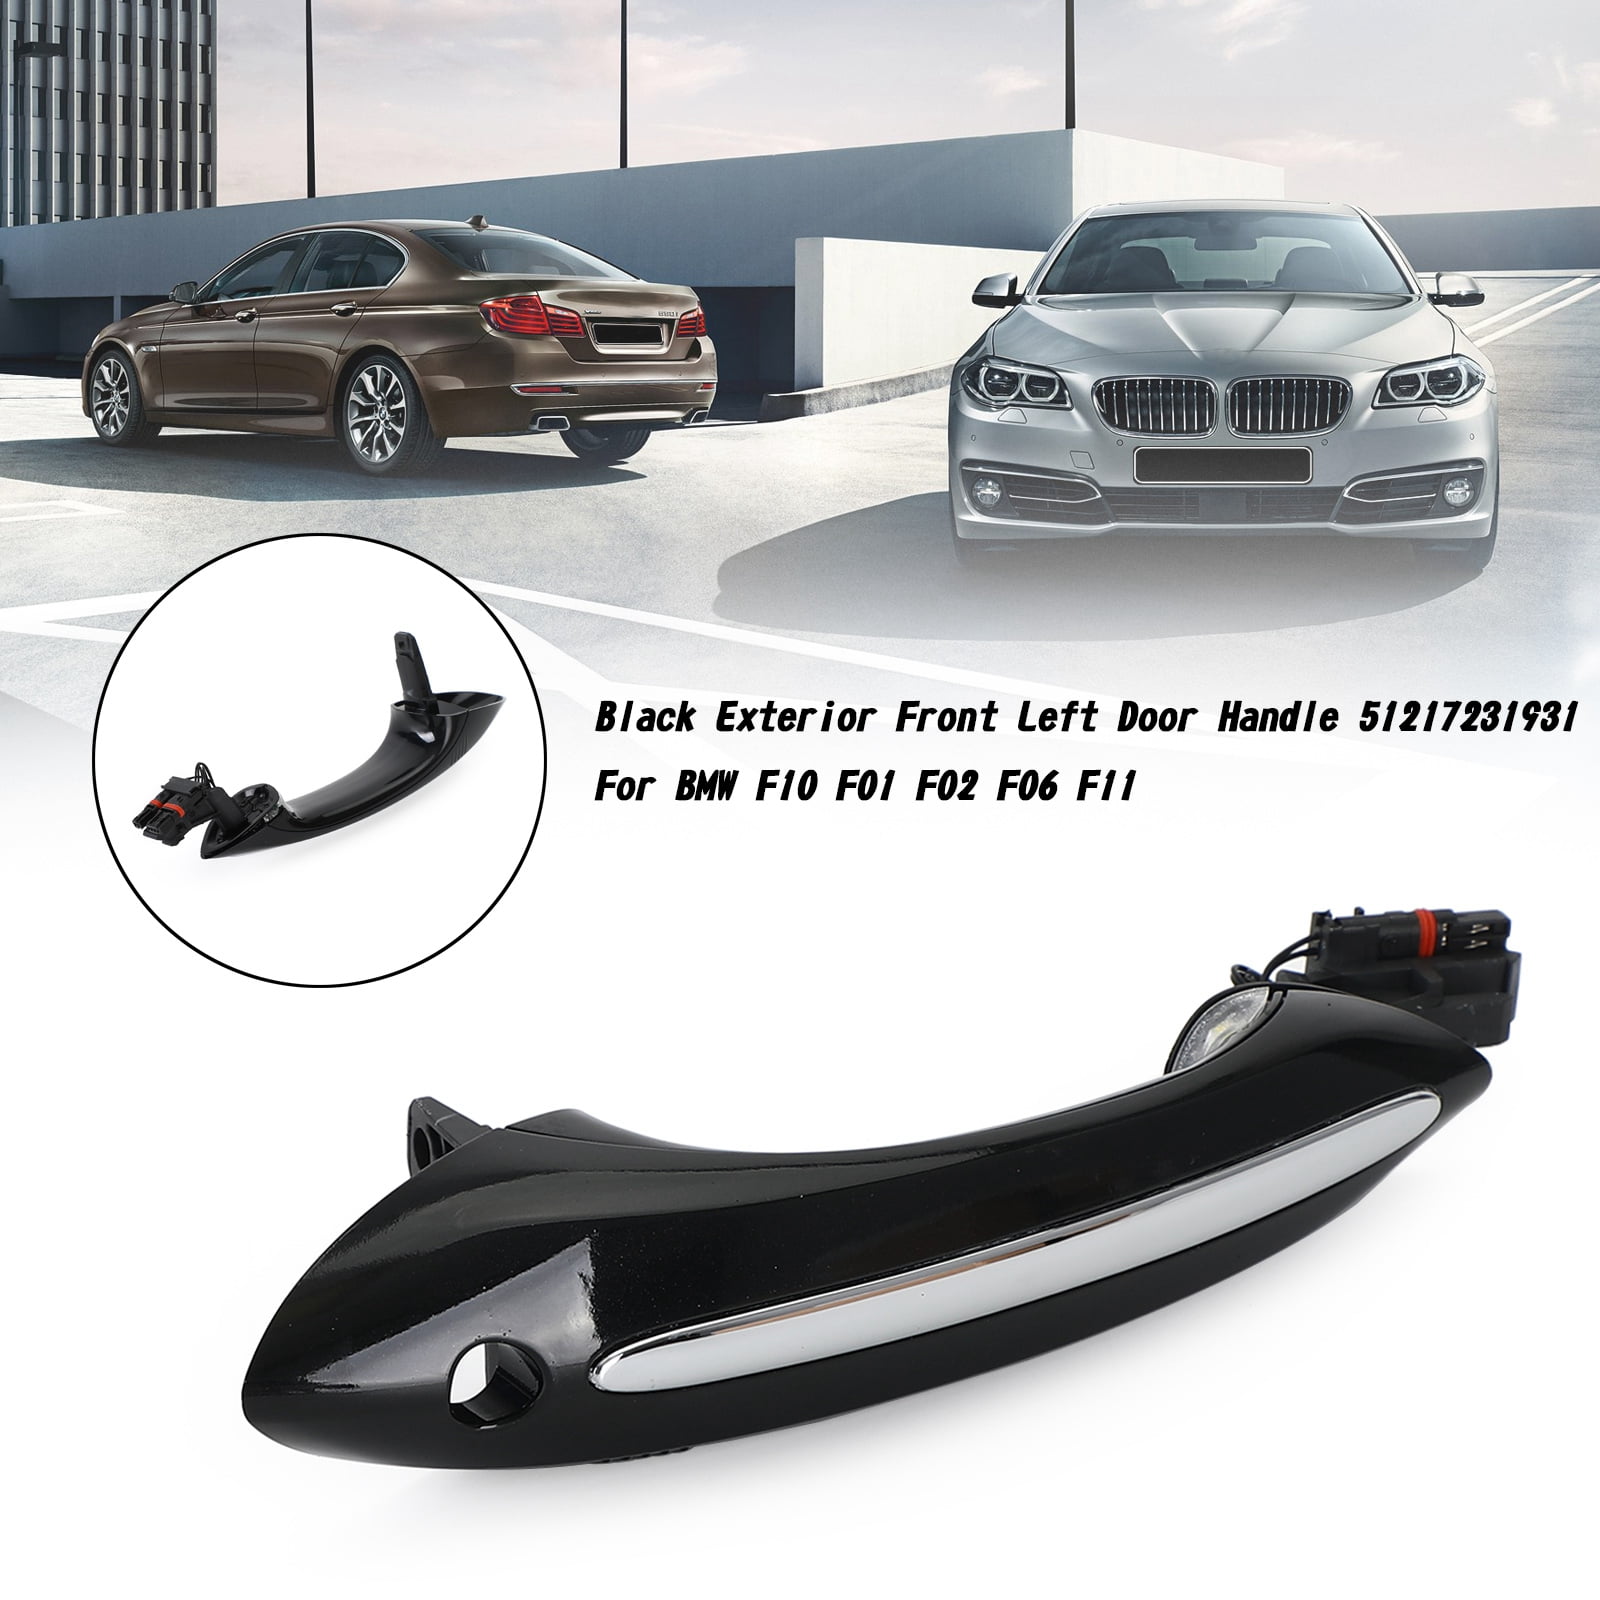 Mad Hornets Black Exterior Front Left Door Handle 51217231931 For BMW F10  F01 F02 F06 F11 